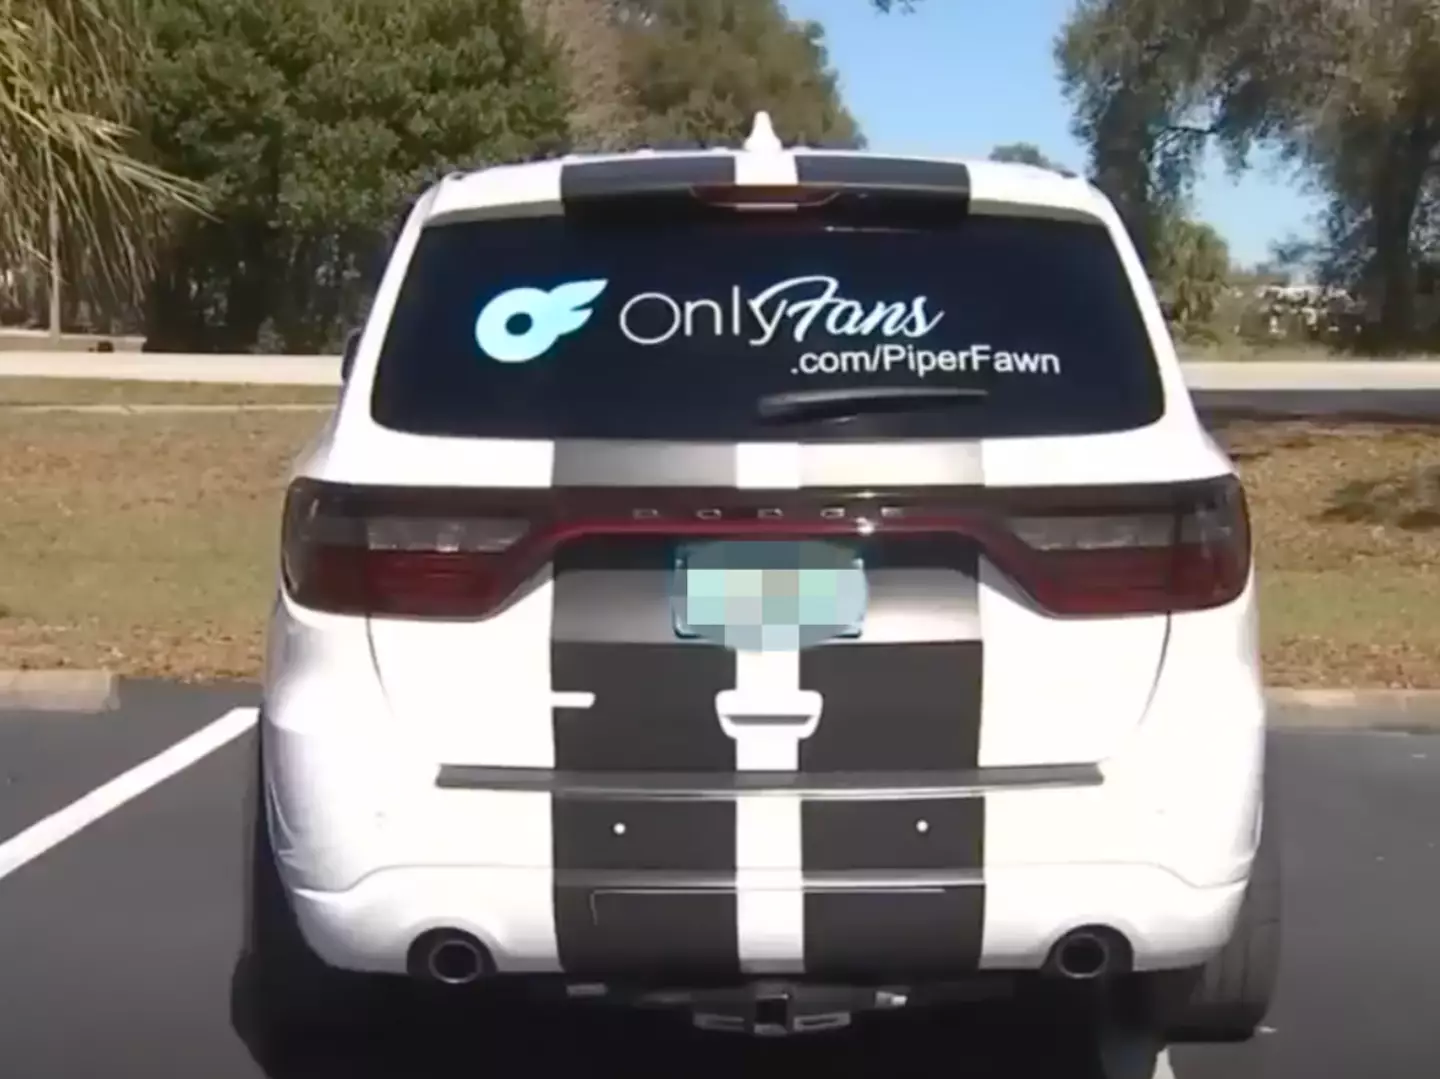 Michelle Cline advertises her OnlyFans account on her car.